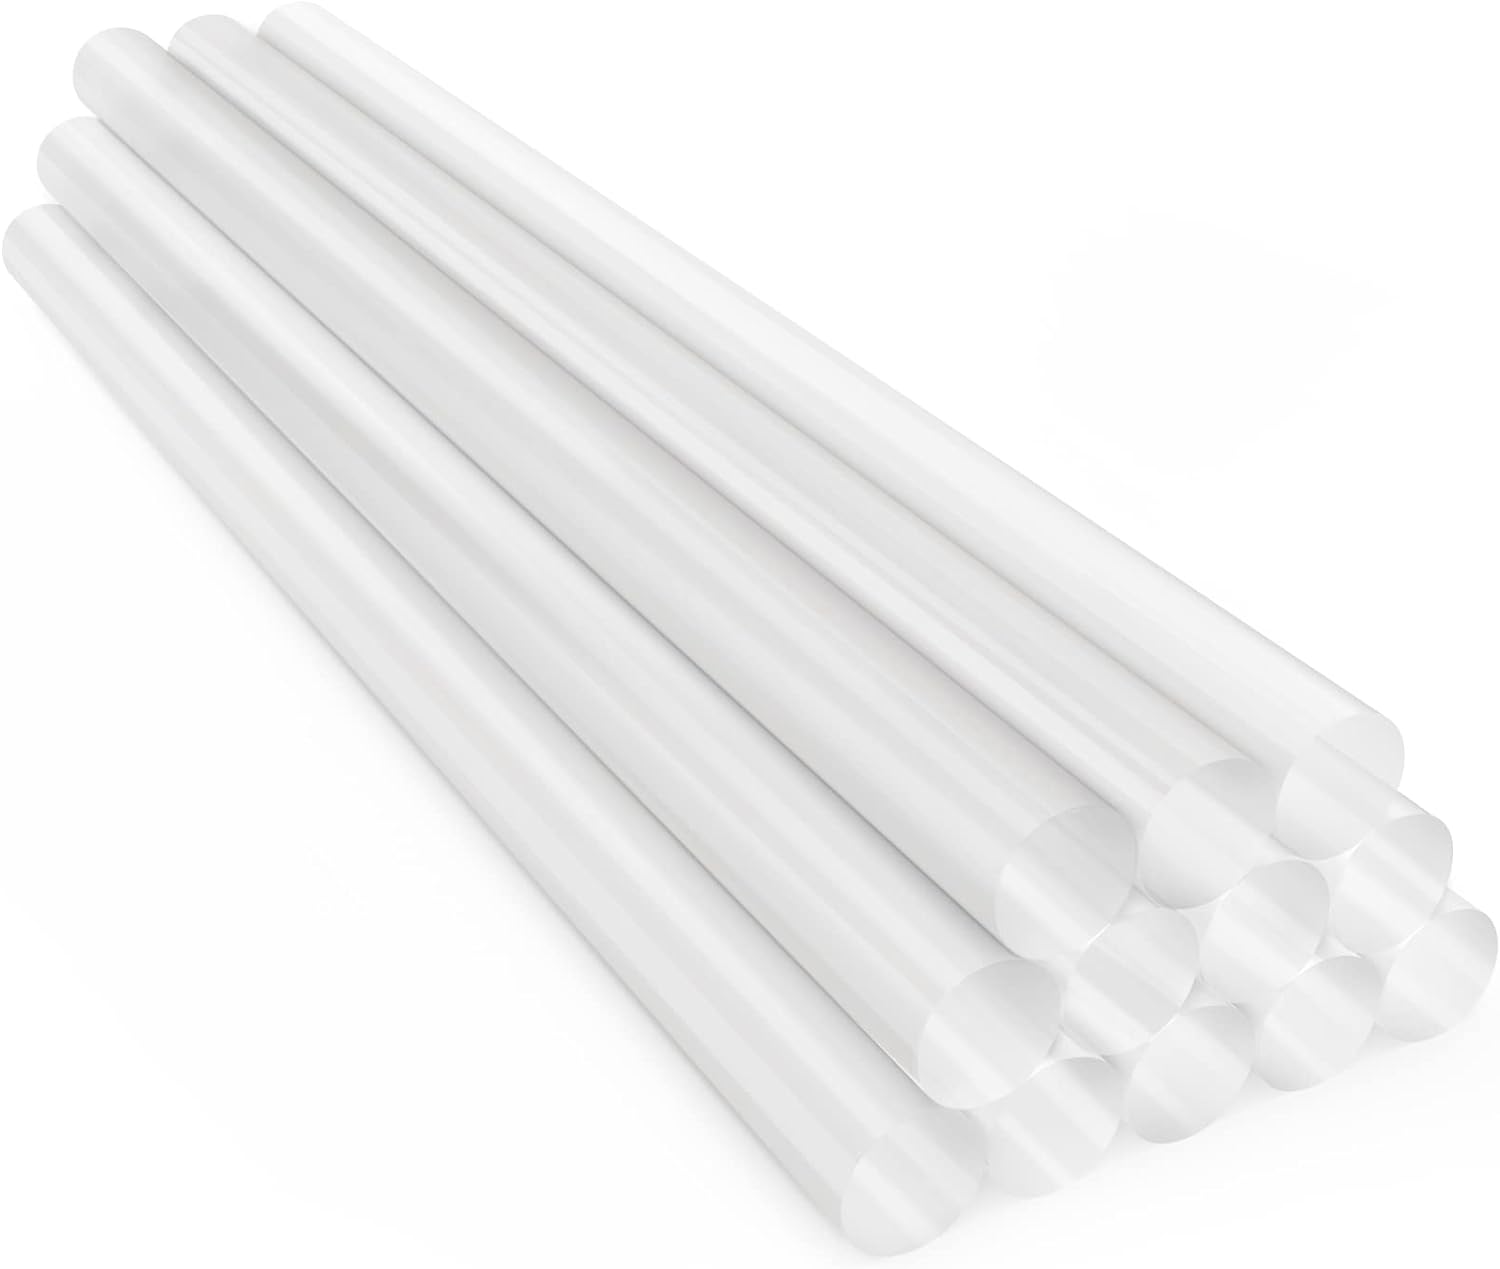 EnPoint Clear Hot Glue Sticks Full Size, 12 Pack 8 Long x 0.43 Dia